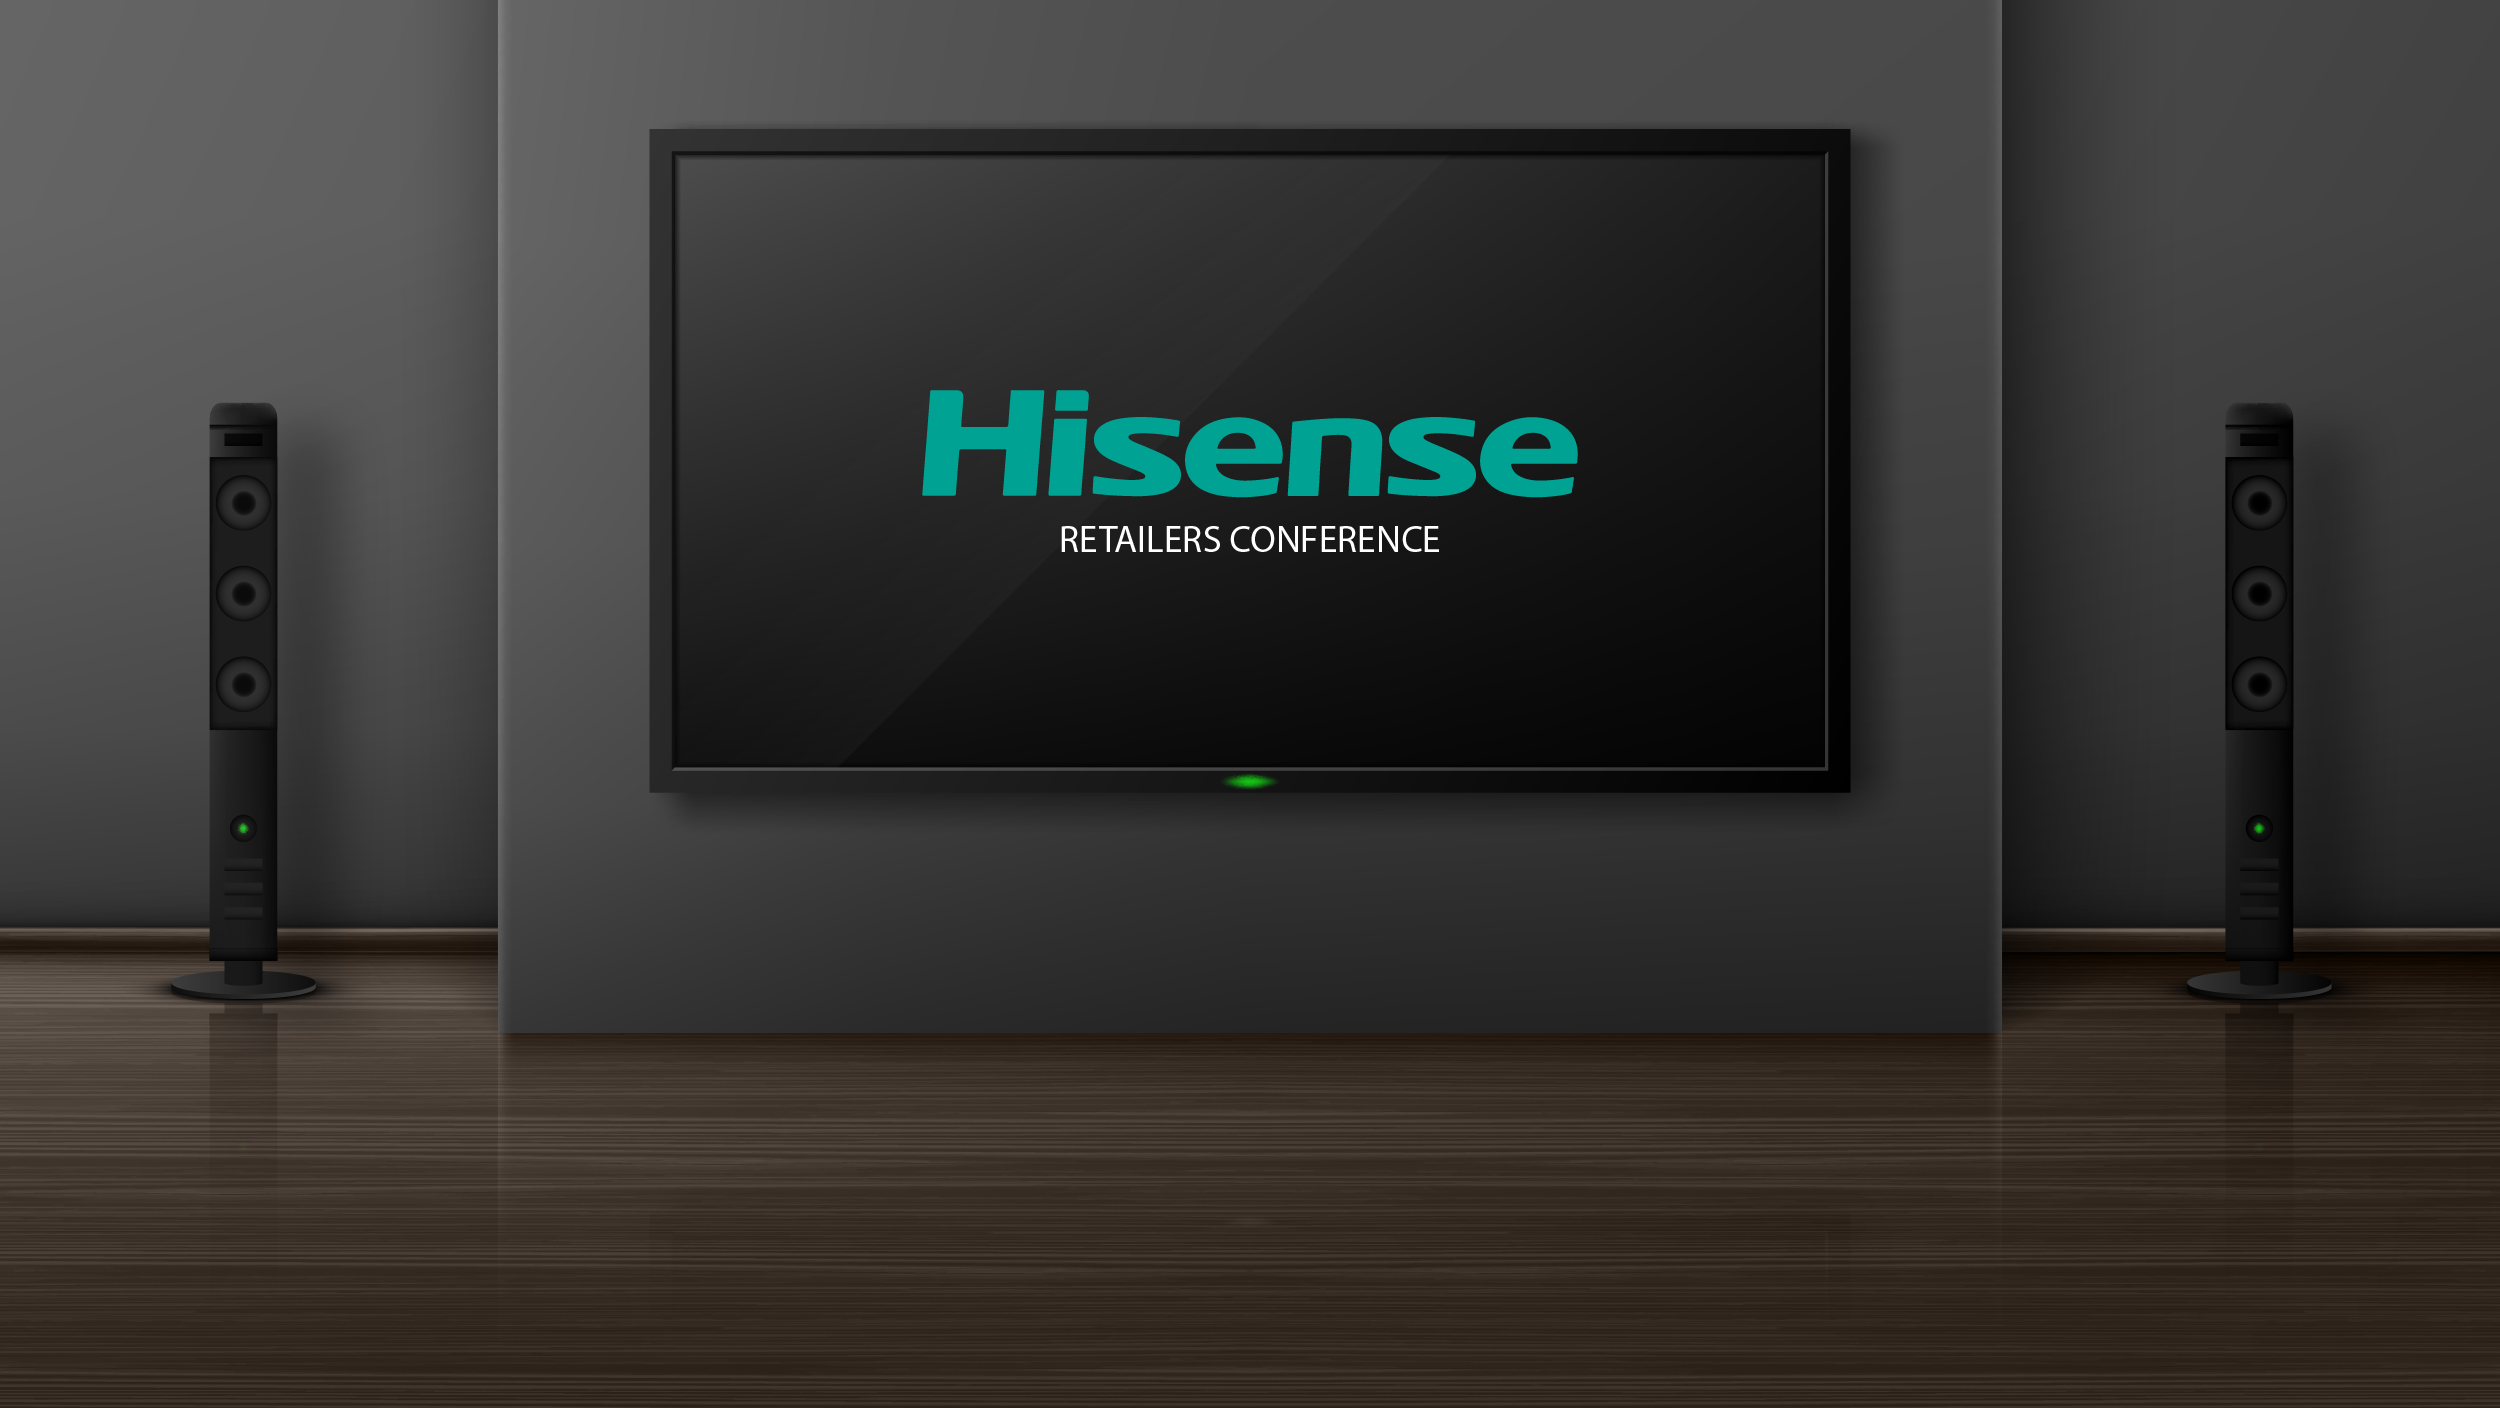 Hisense - The Ultimate in Color, Sound & Content